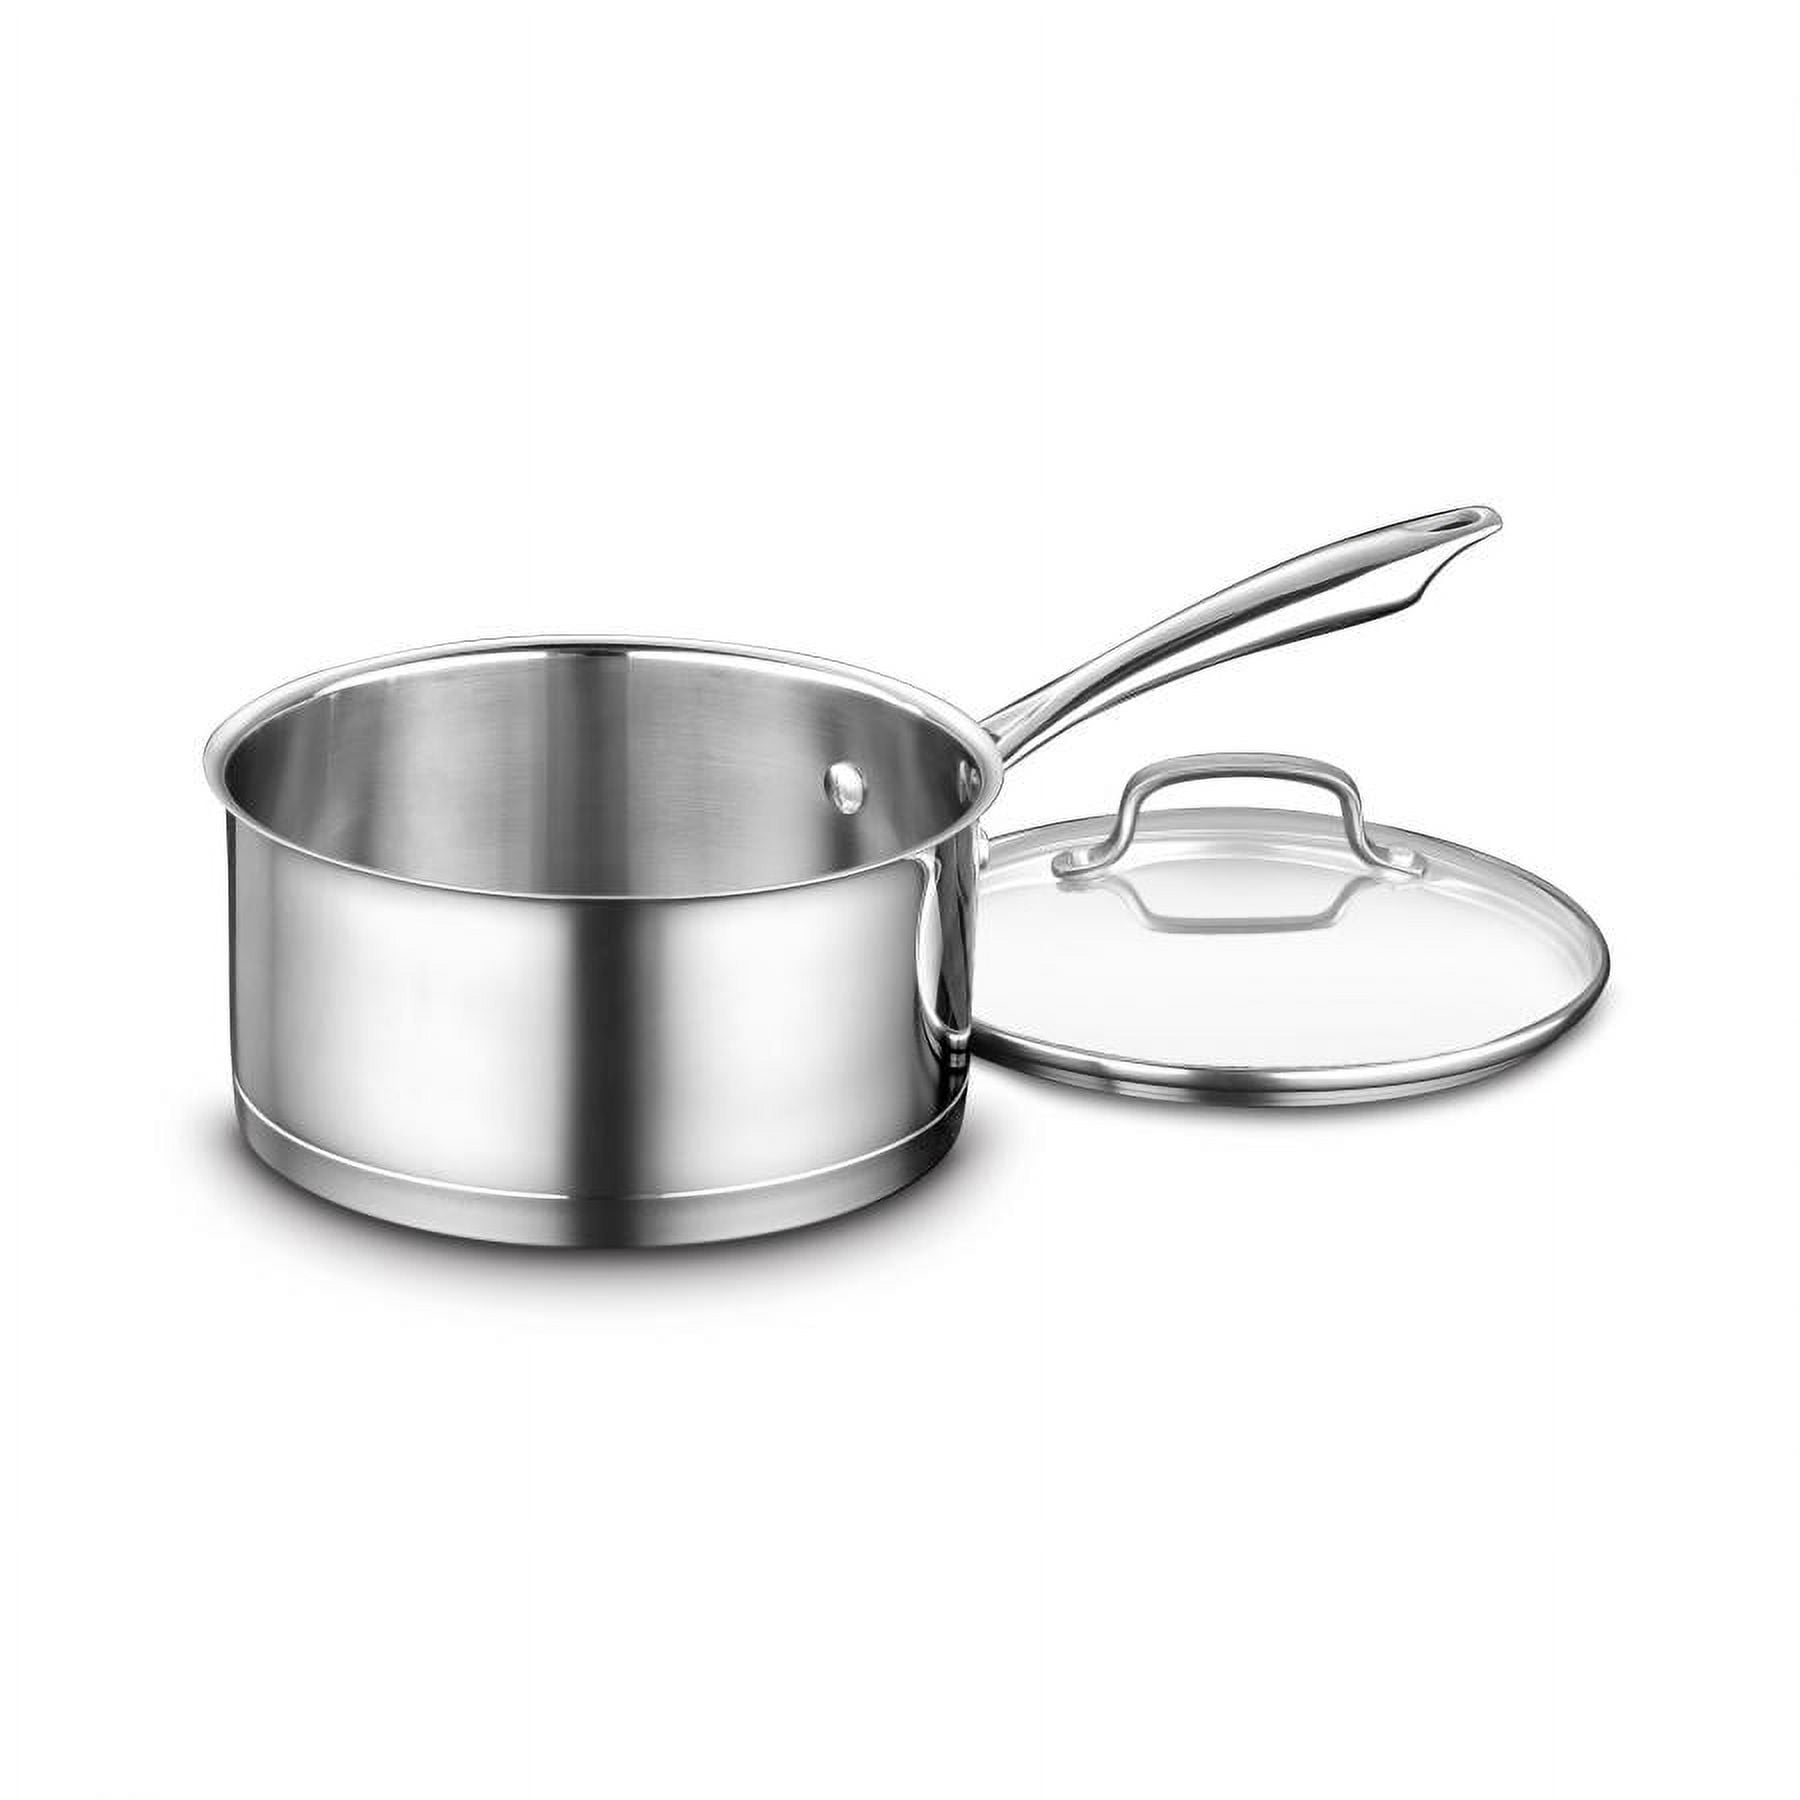 Cuisinart Sauce Pan with Lid by Cuisinart, 3 Quart Chef's Pan, Stainless  Steel, 8335-24